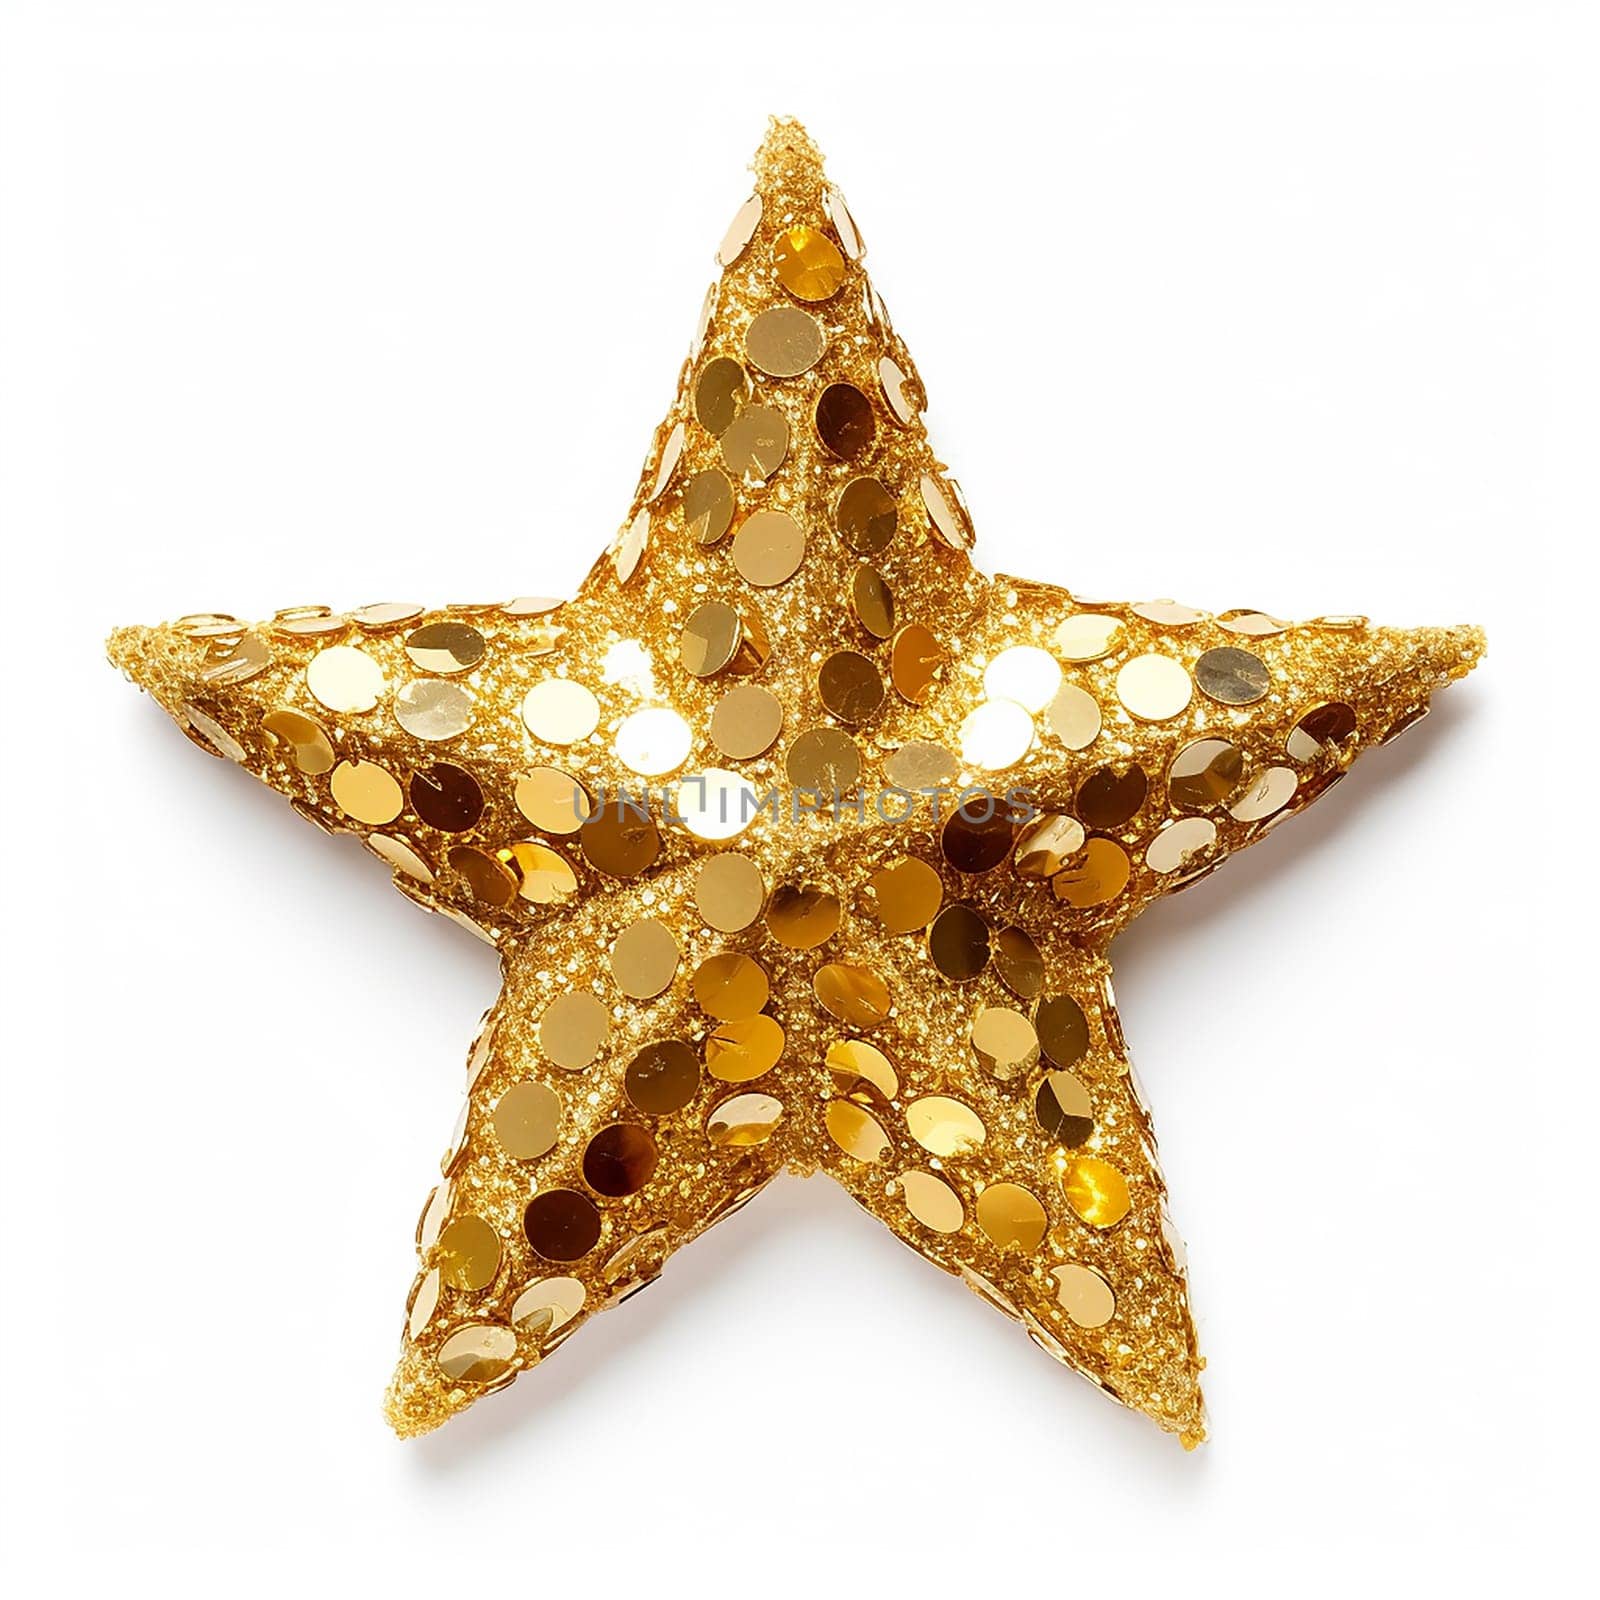 A glittering golden star with sequins isolated on white. by Hype2art